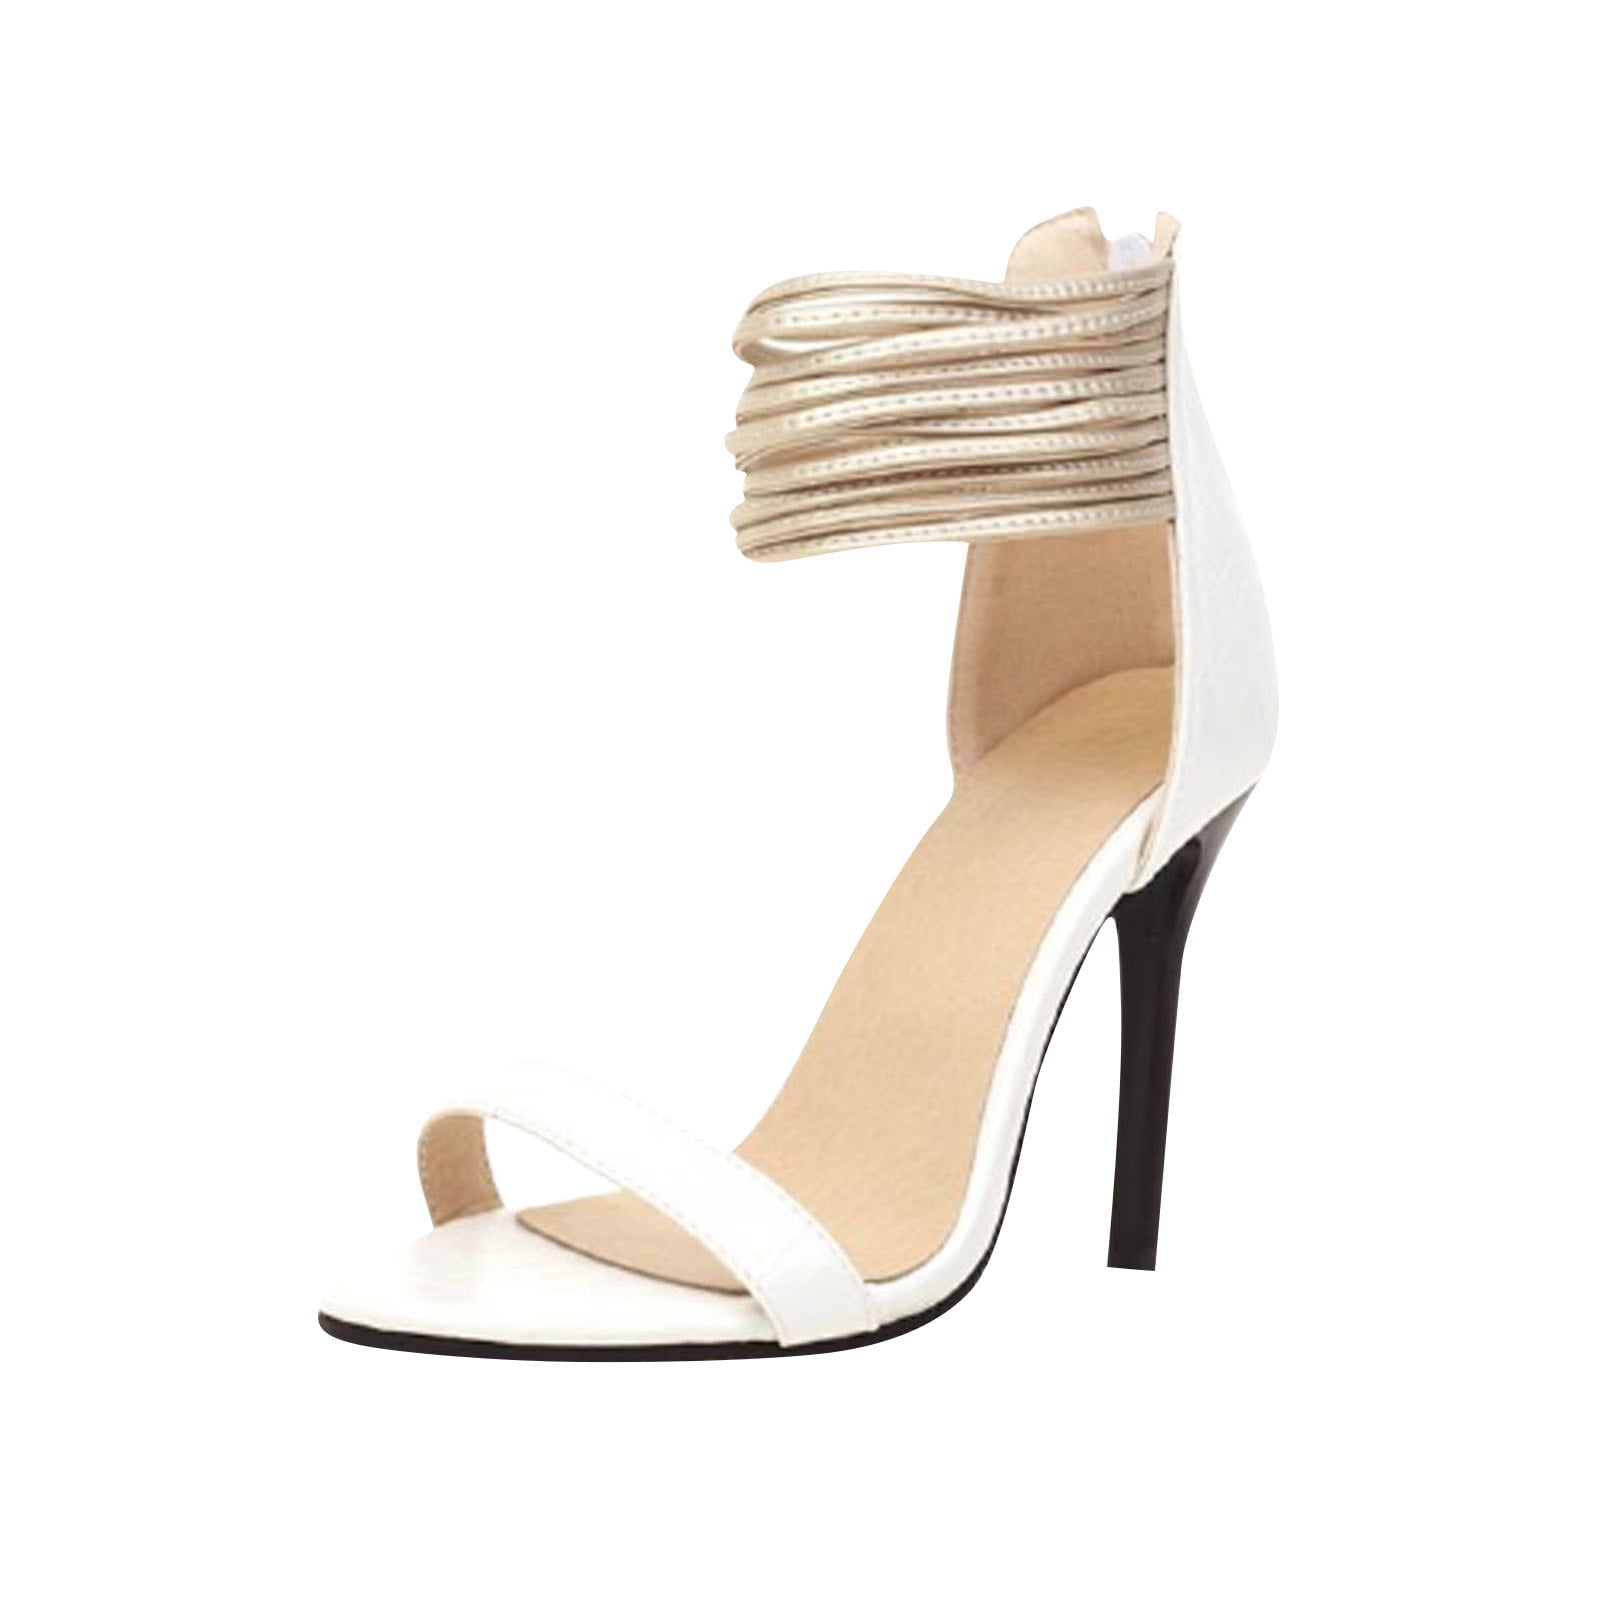 Shoes High-Heeled Sandals Platform High-Heeled Sandals Just Fab Platform High-Heeled Sandal natural white-black casual look 